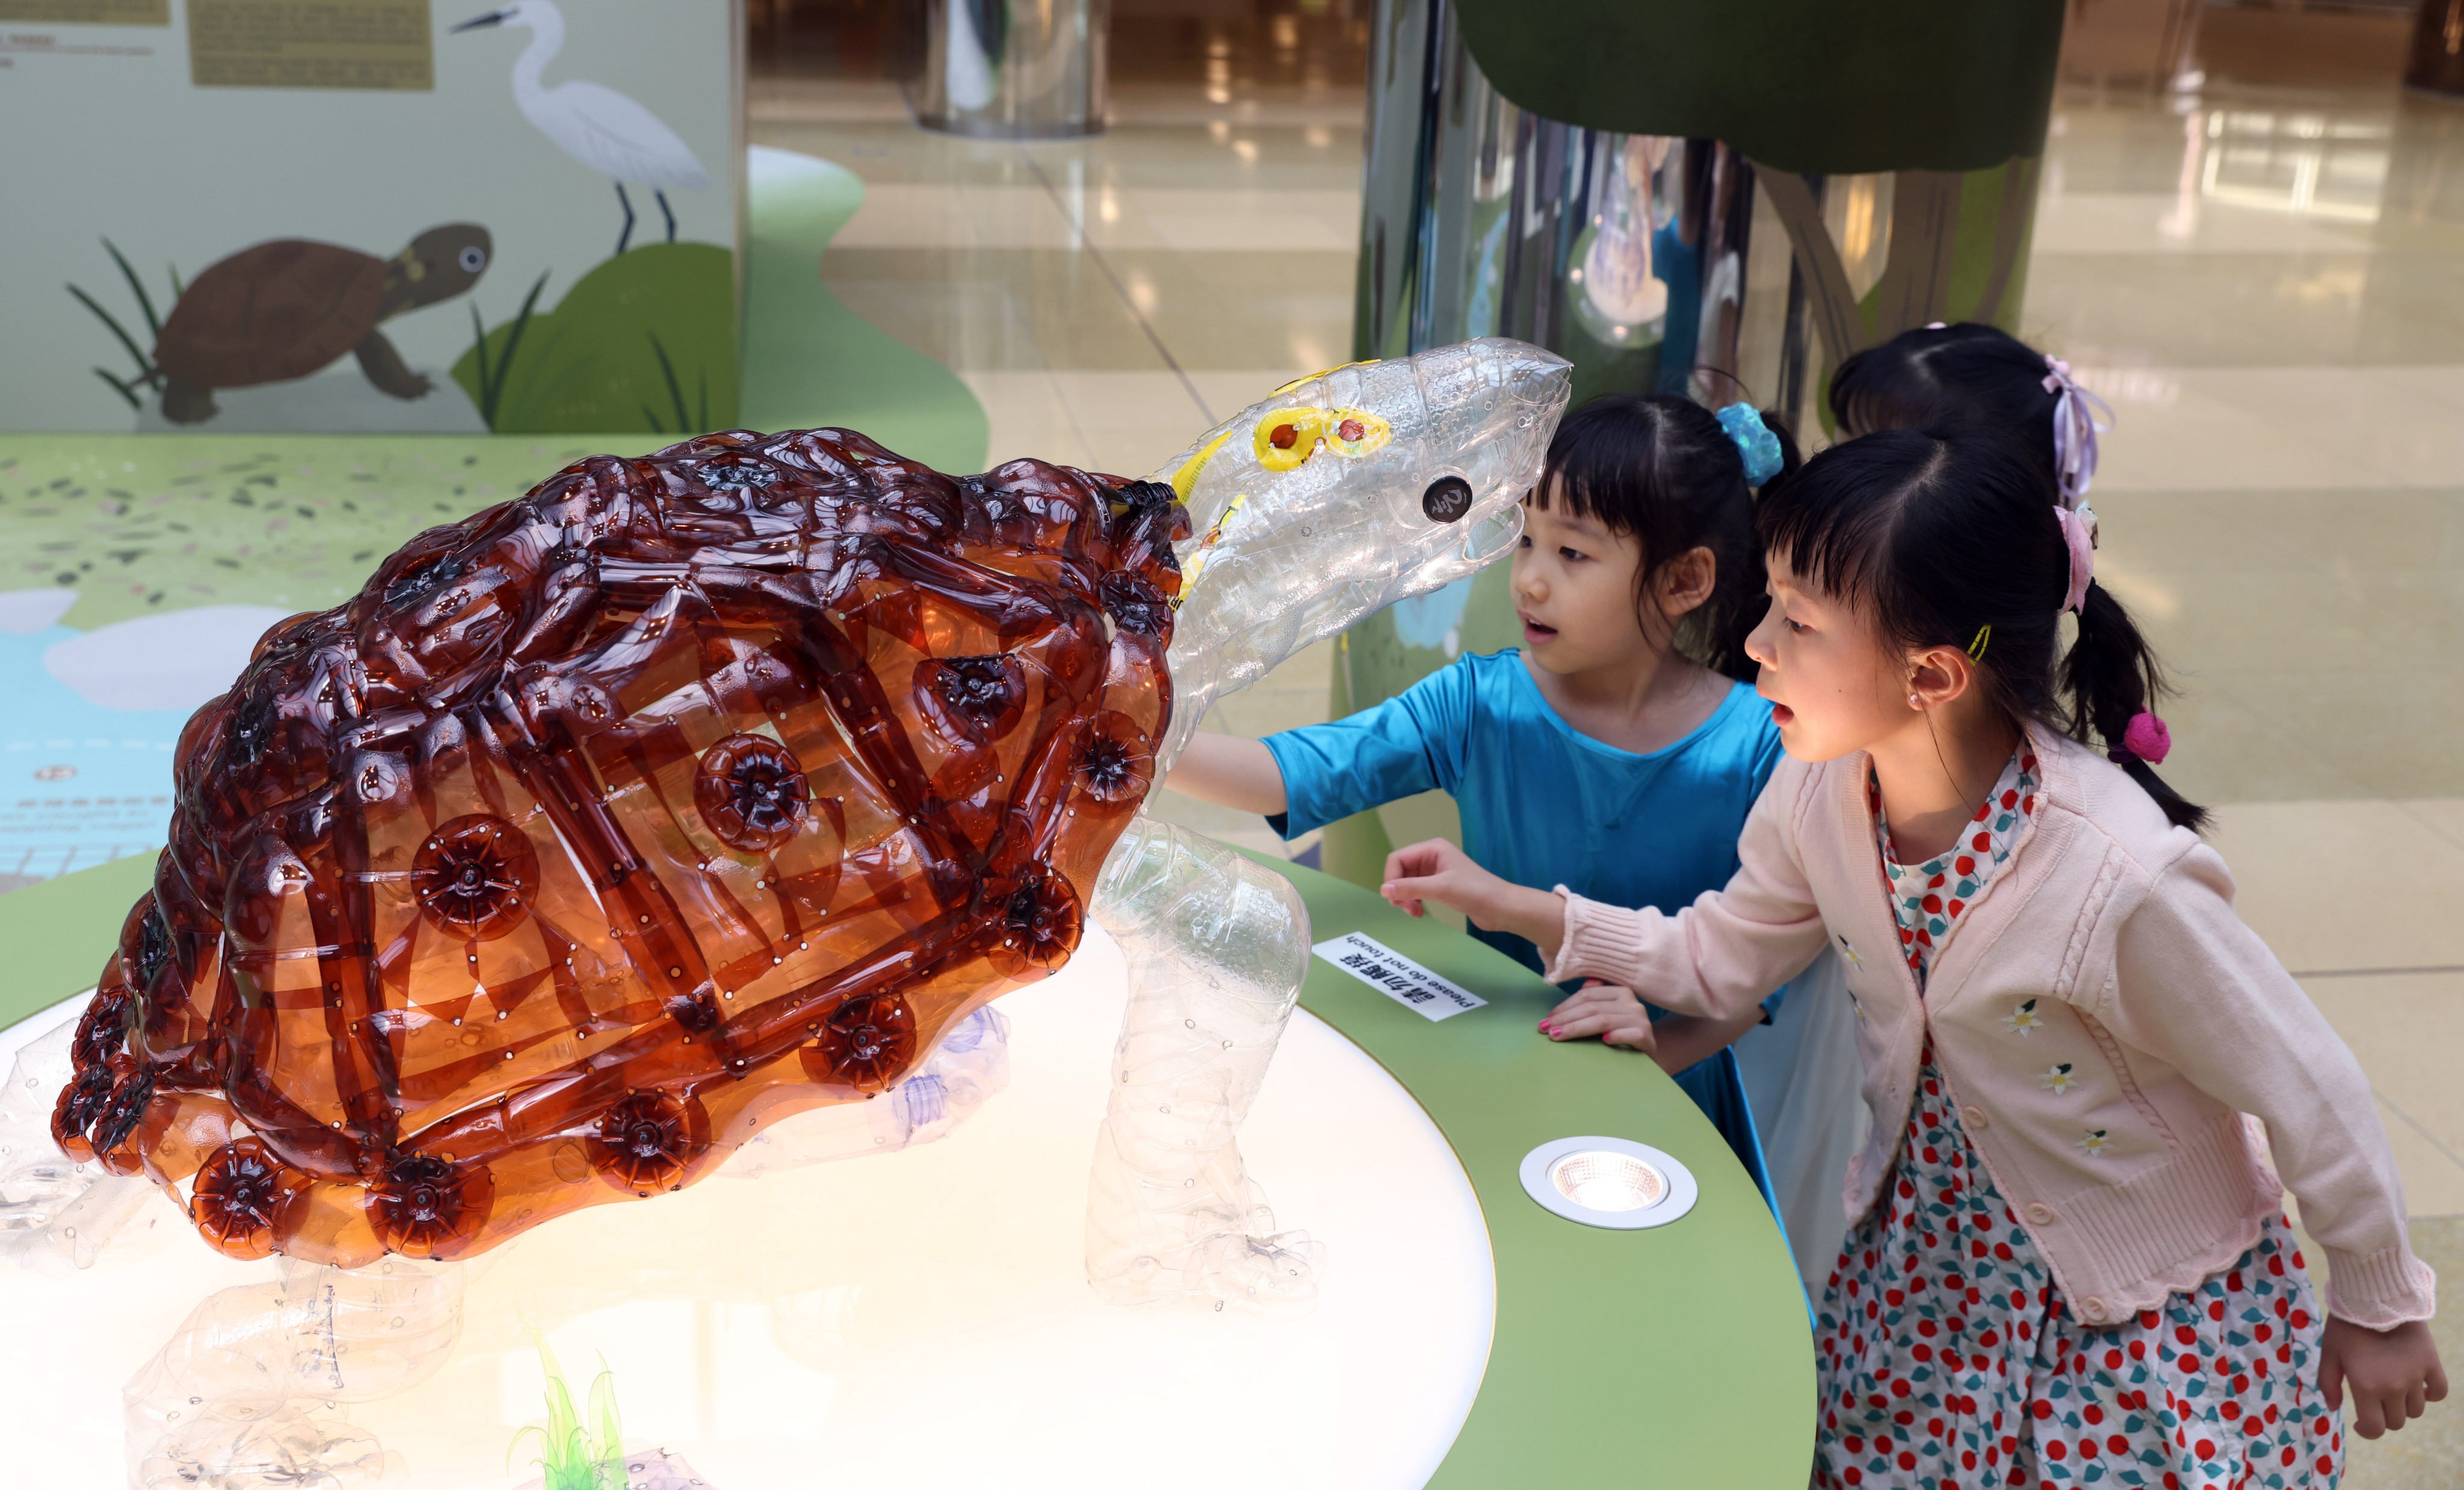 A tortoise made from used plastic bottles is displayed at the Ocean Park Conservation Foundation’s “Discovering the Hidden Treasure of Carapace Wonders” Freshwater Turtle & Horseshoe Crab Conservation Exhibition at Cityplaza, Taikoo, on March 28. Photo: Yik Yeung-man